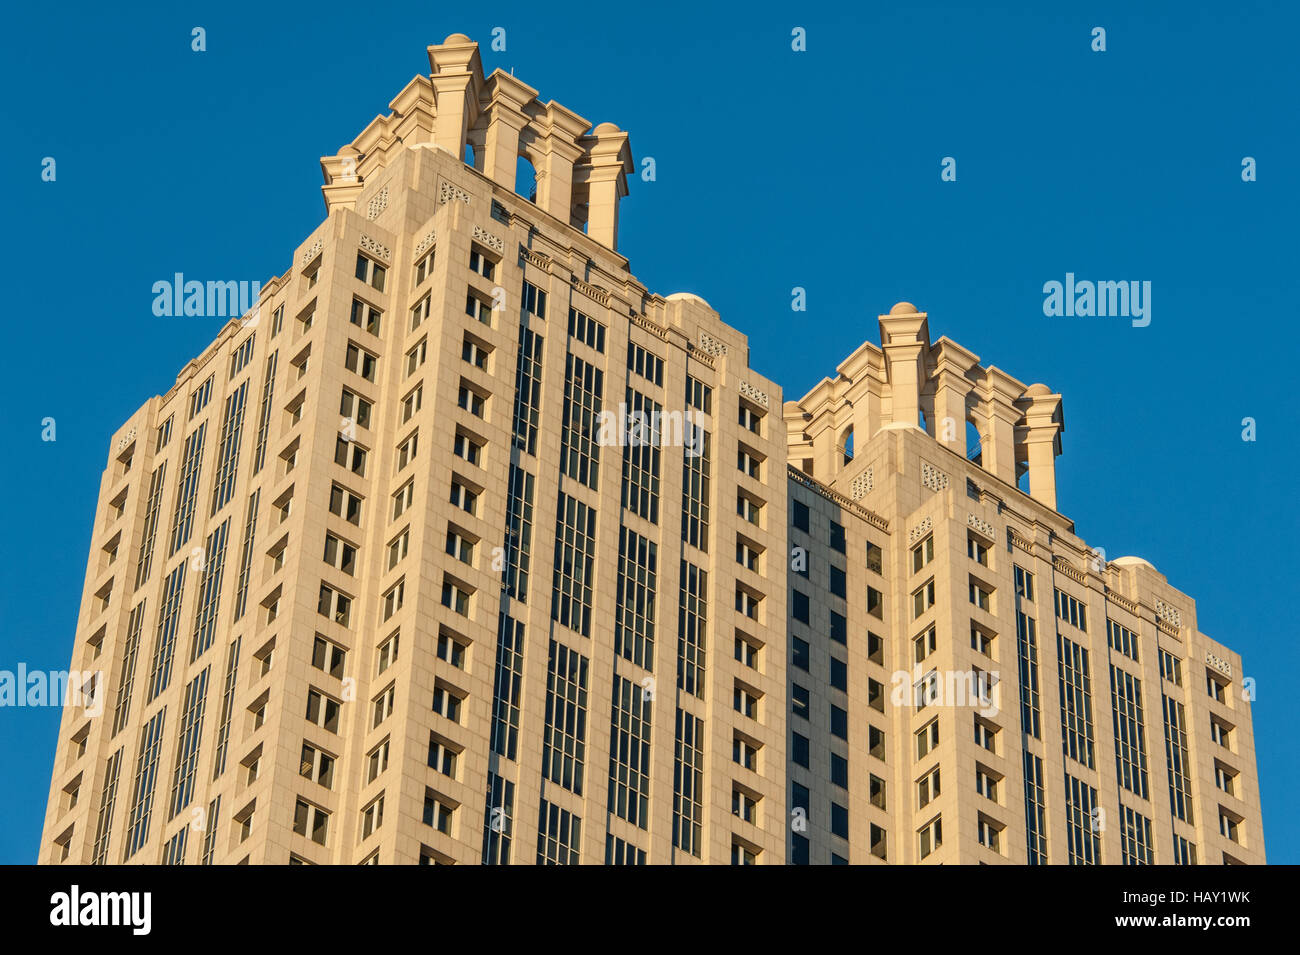 191 Peachtree Tower stands as an iconic landmark in downtown Atlanta, Georgia, USA. Stock Photo